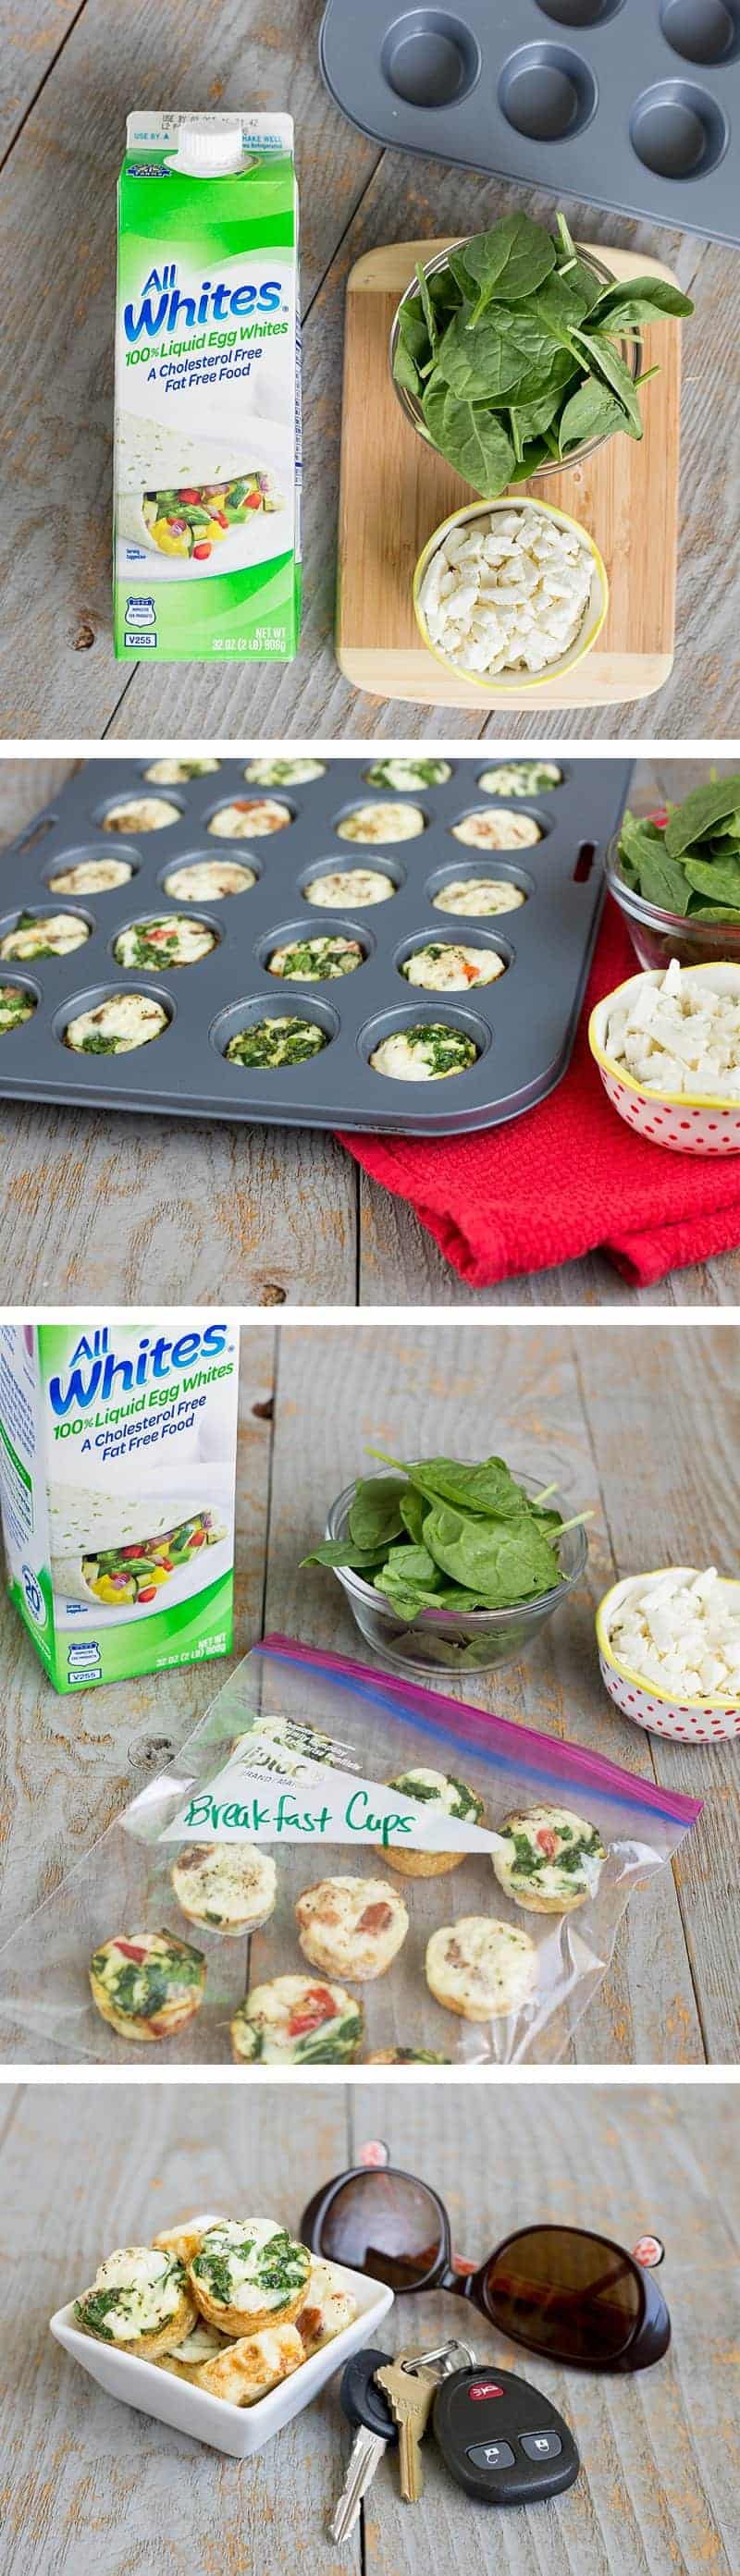 Here are 5 insanely easy breakfast recipes that will give you a morning boost. This healthy Baked Spinach & Feta Egg White Omelet Cups recipe is packed full of protein and is a quick on-the-go breakfast snack. You can make one batch to last a full week. *Crazy easy way to start your day with eggs